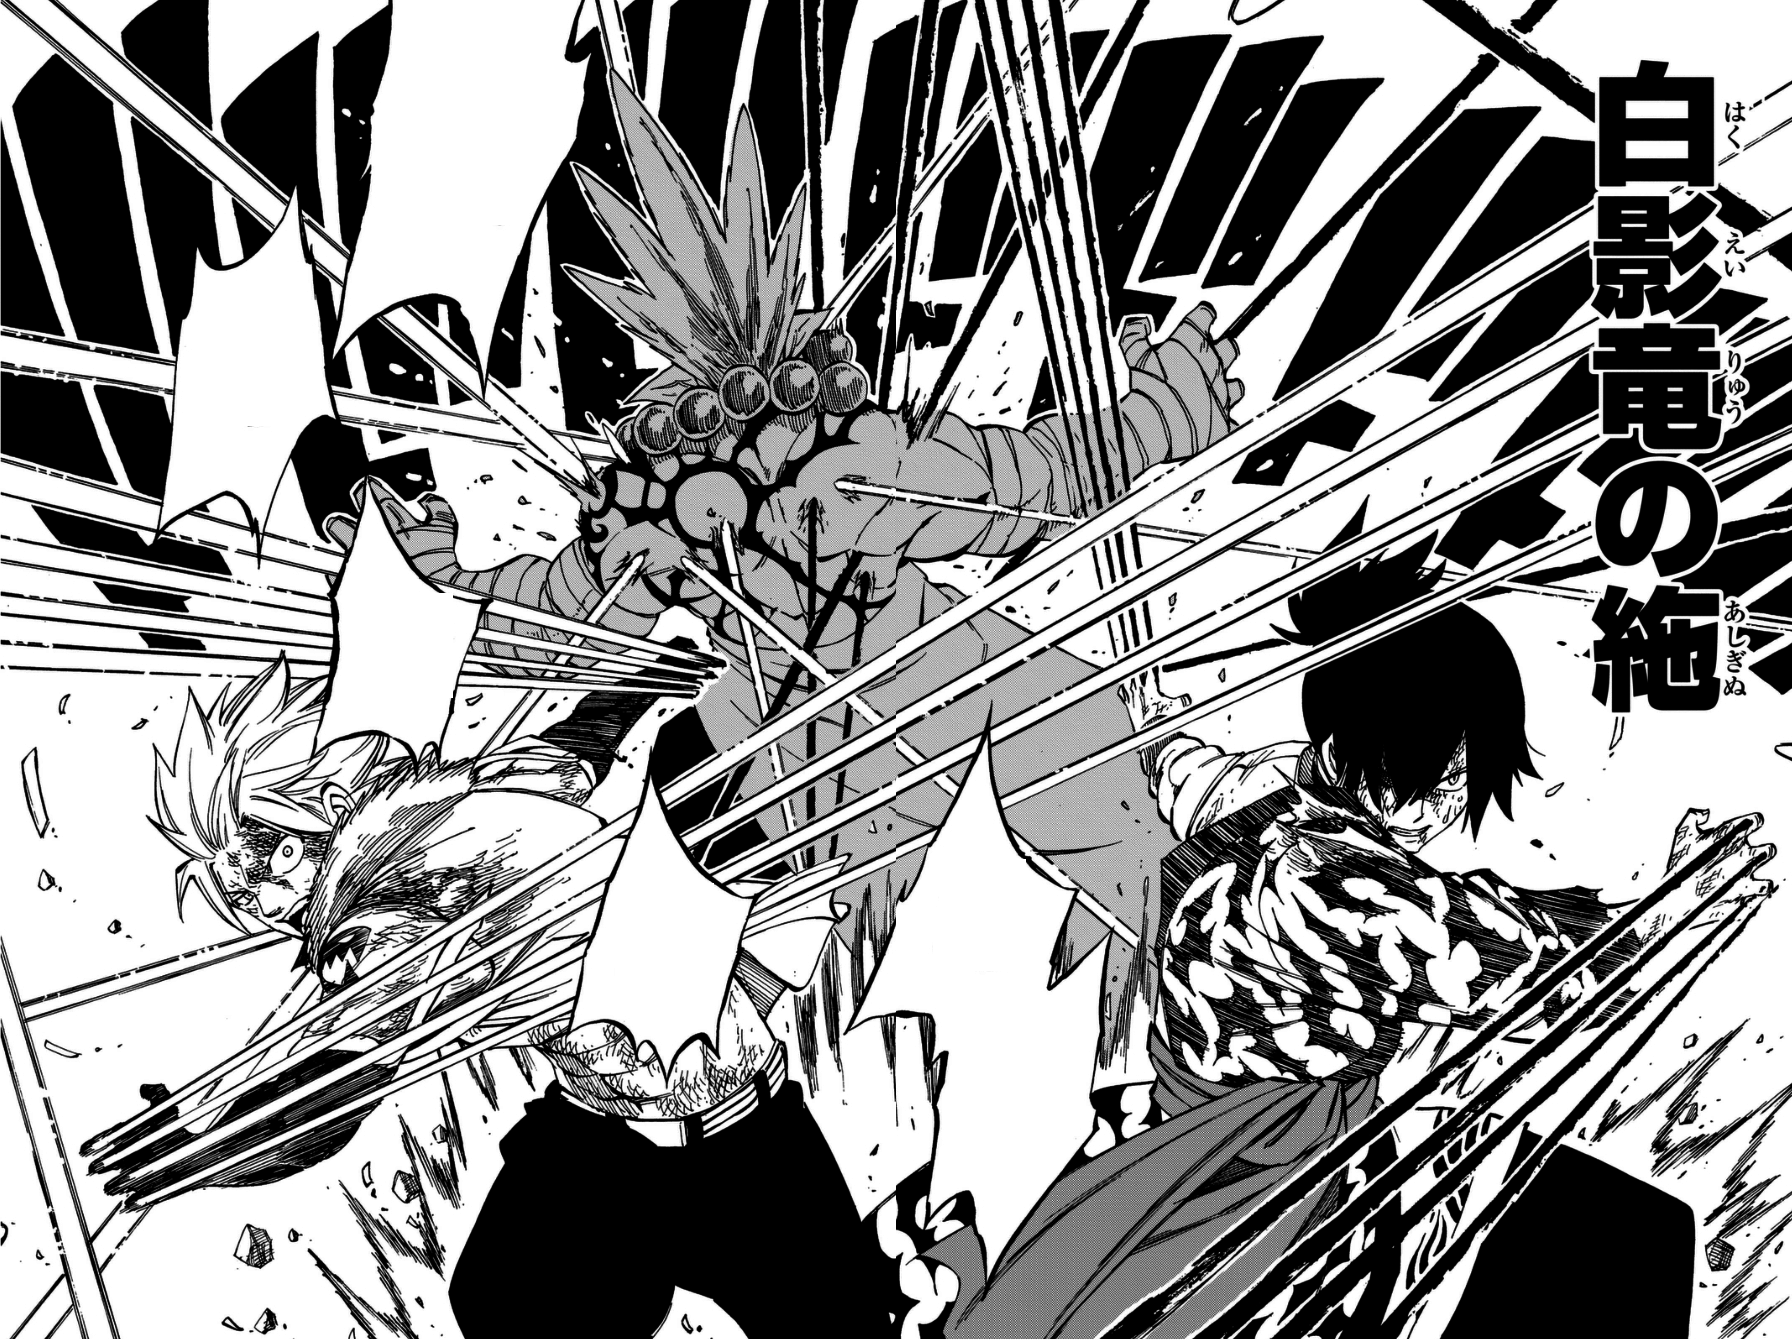 http://vignette4.wikia.nocookie.net/fairytail/images/4/4a/Sting_and_Rogue_defeat_Jiemma.png/revision/latest?cb=20141117102243